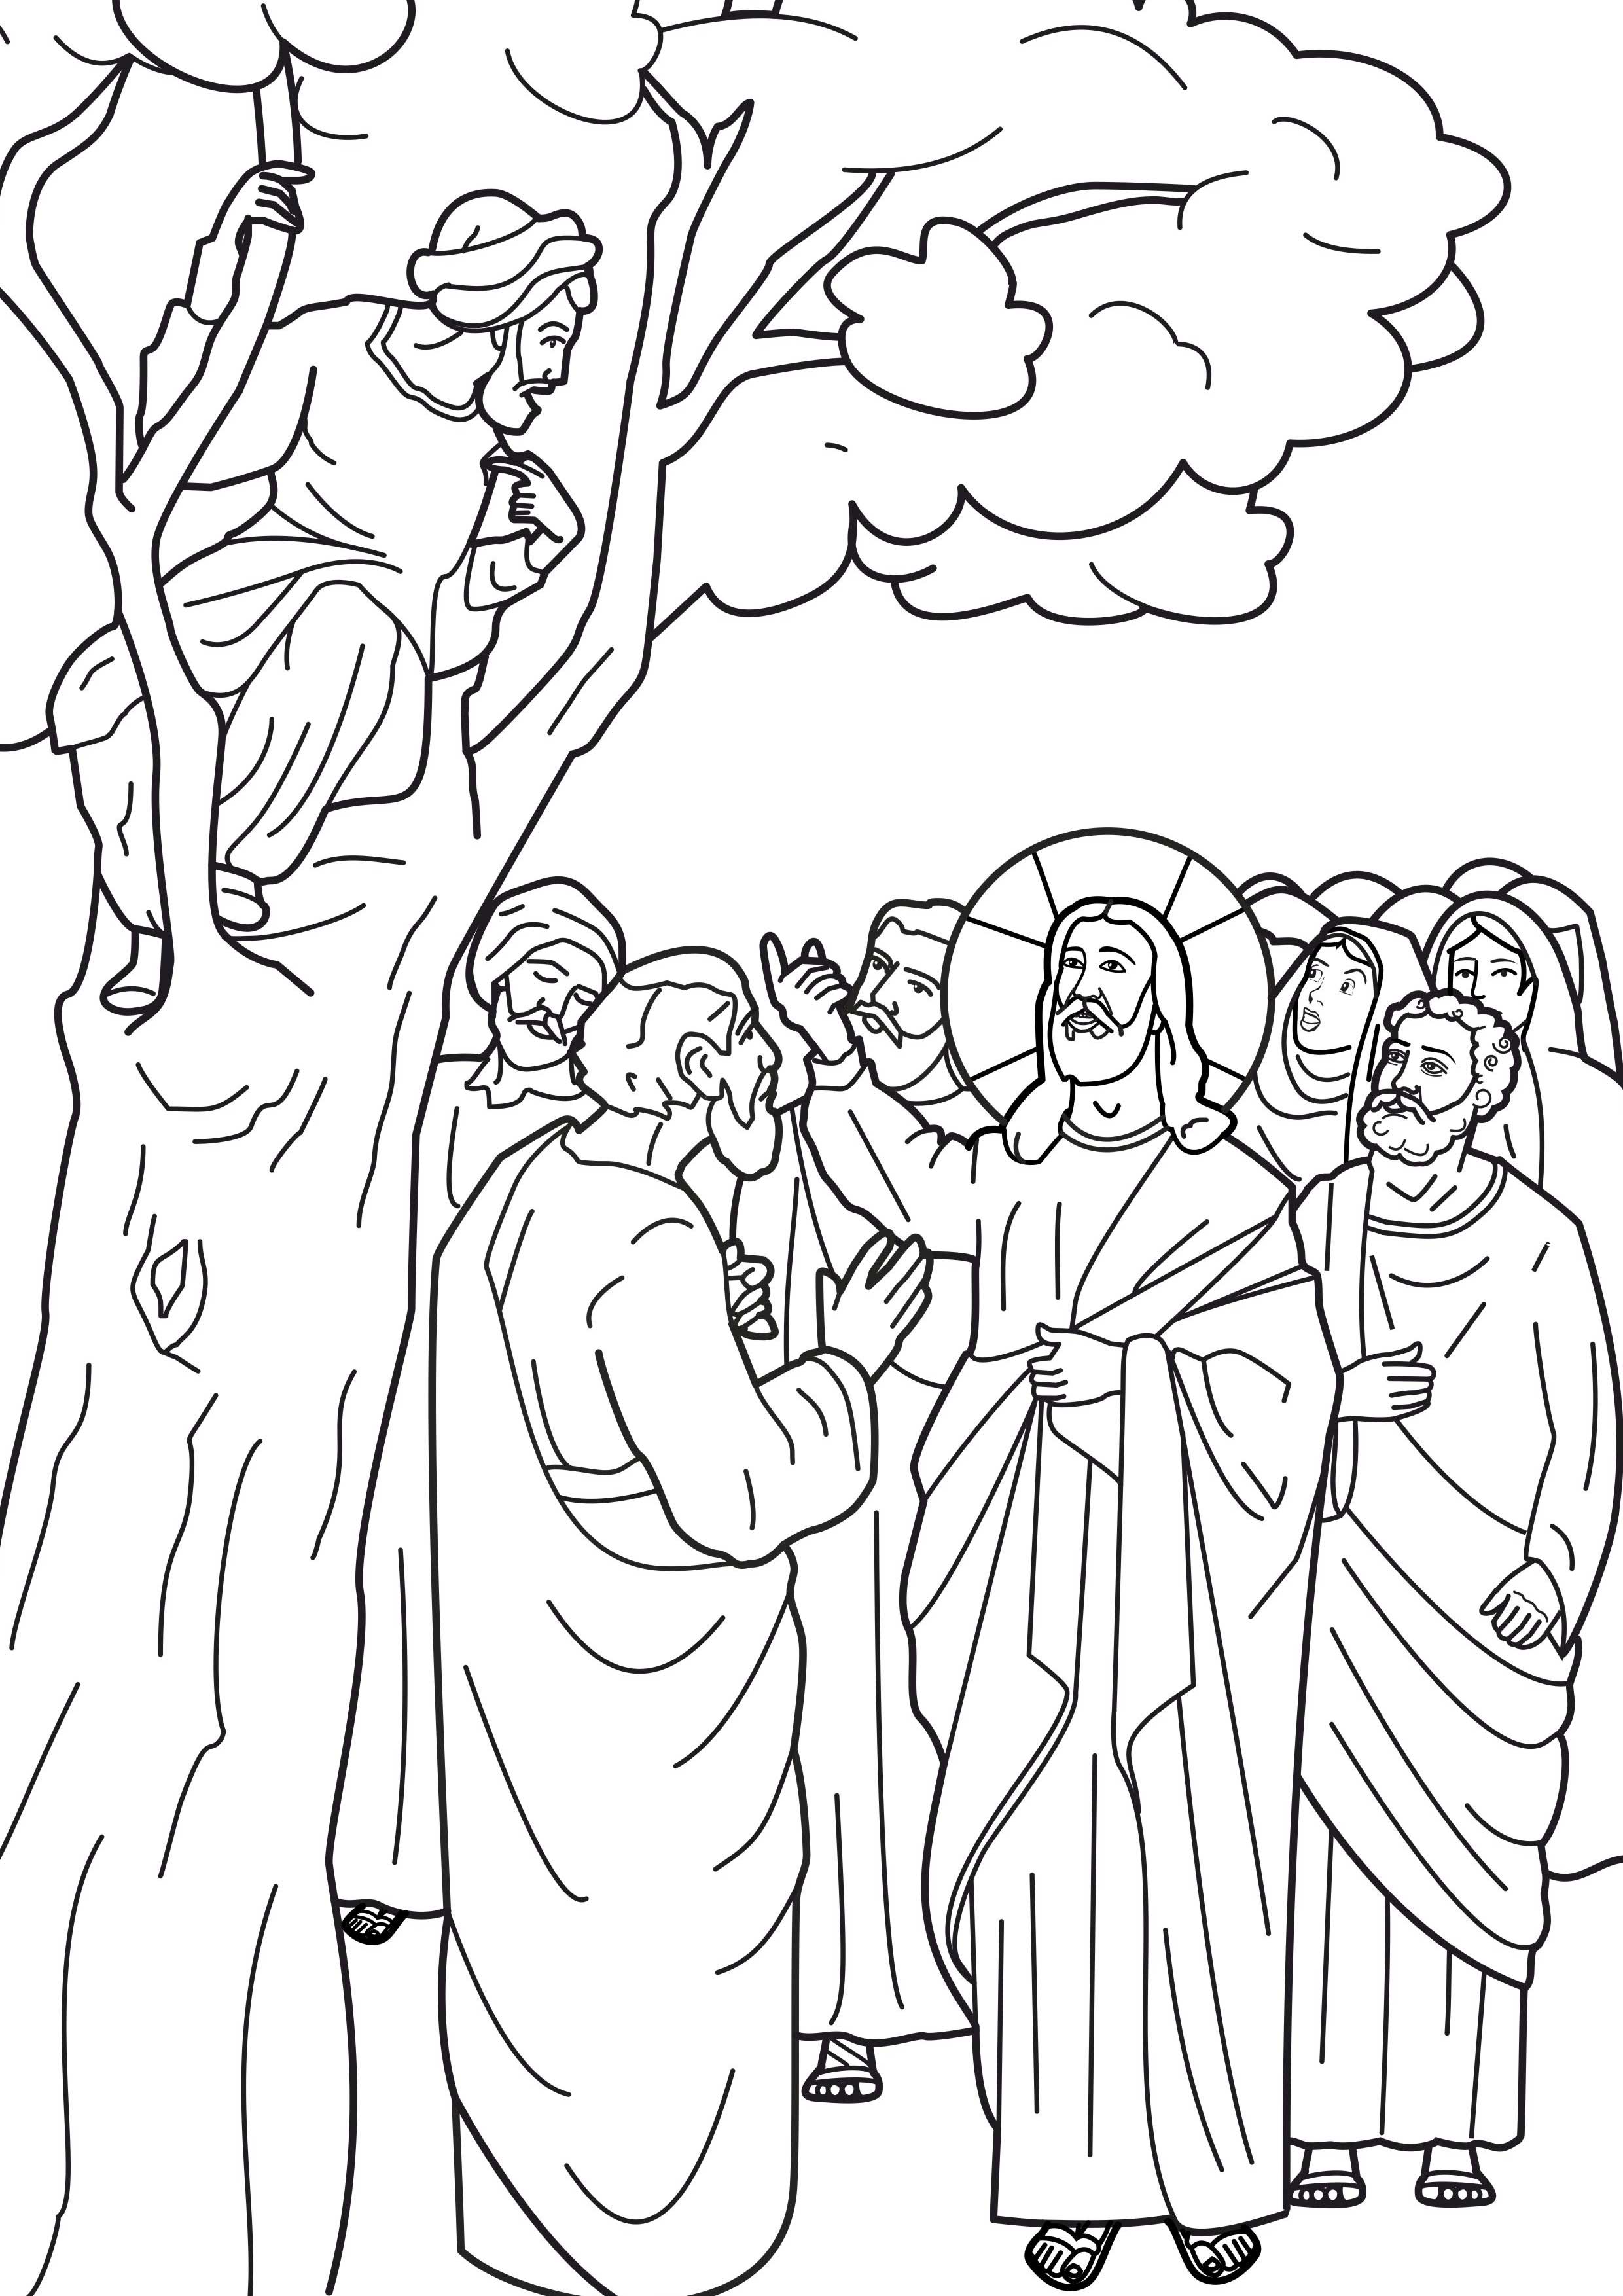 Zacchaeus Coloring Page Printable Coloring Home